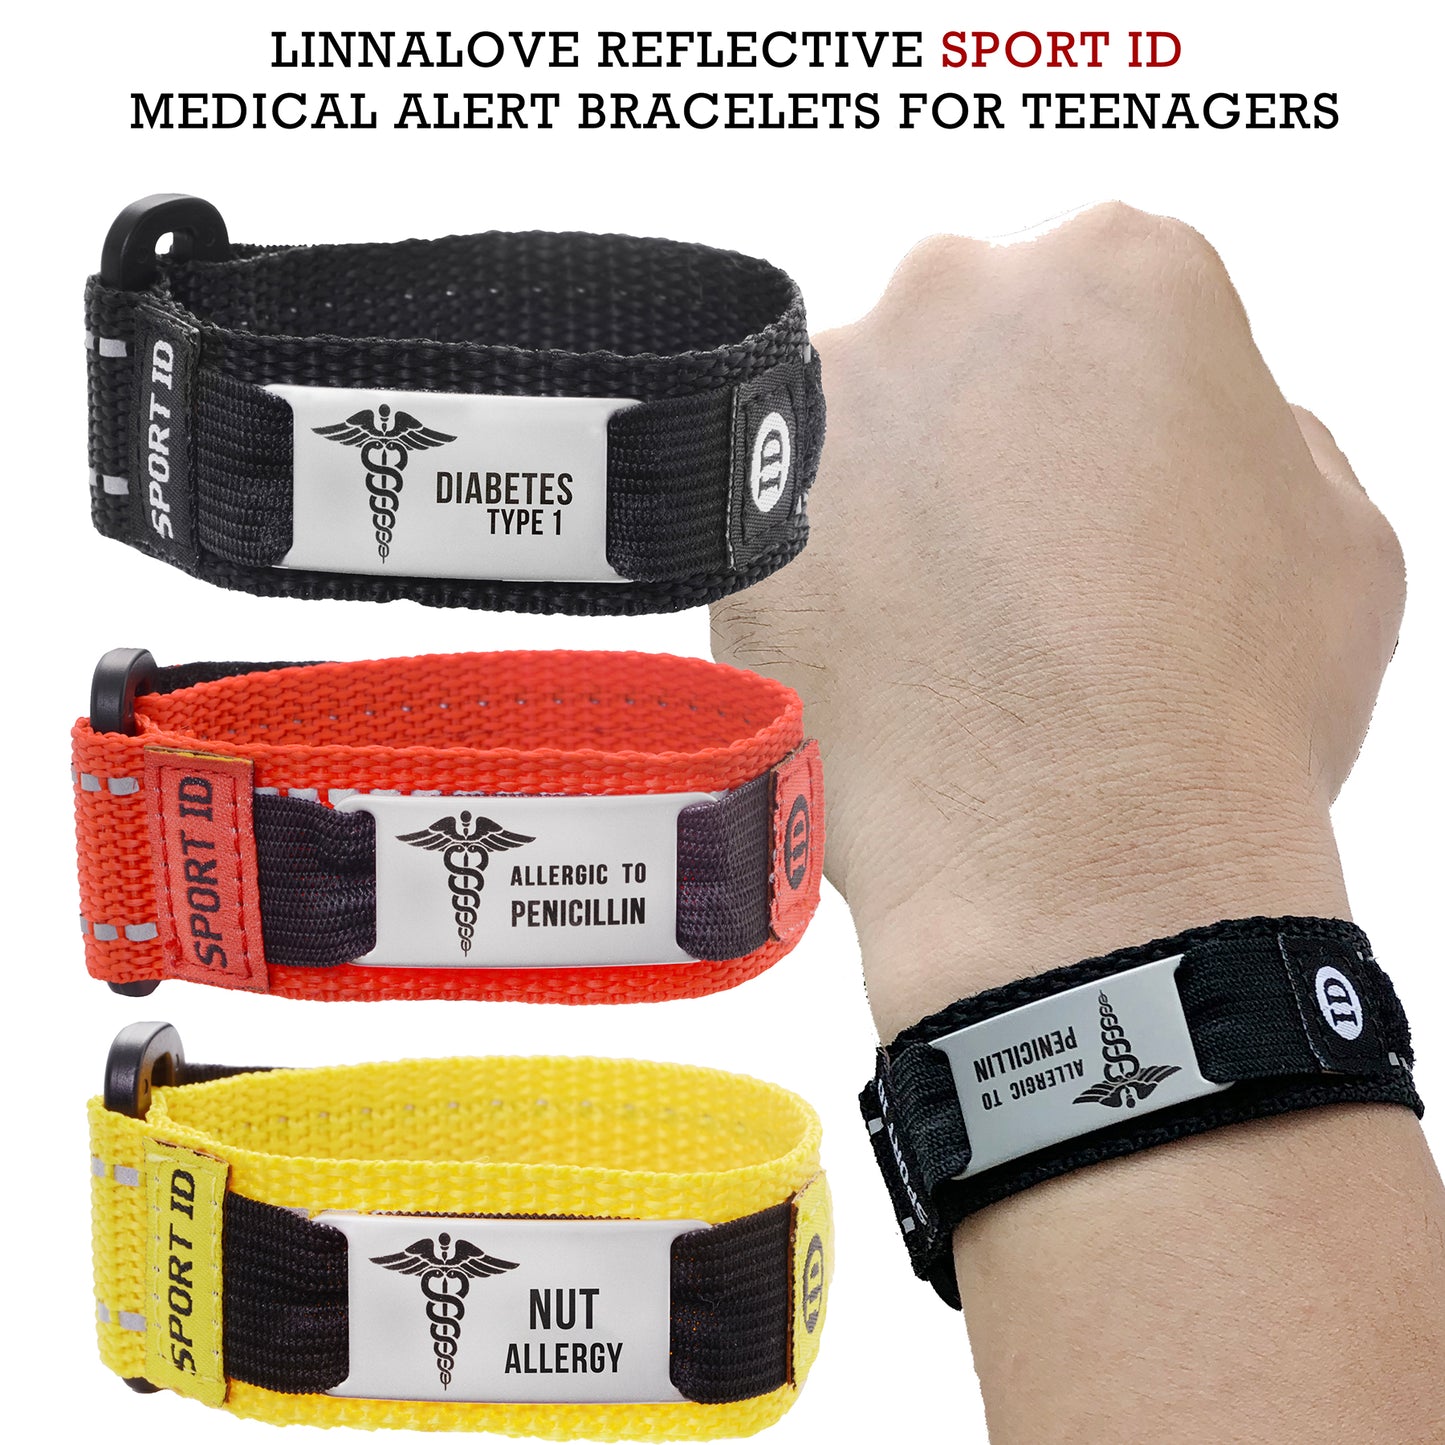 Linnalove Reflective Sport Id Medical Alert Bracelets for Teenagers,boy and Girls with Engraving Diabetes Type 1/2,blood Thinner,Allergic To Penicillin,Nut and More